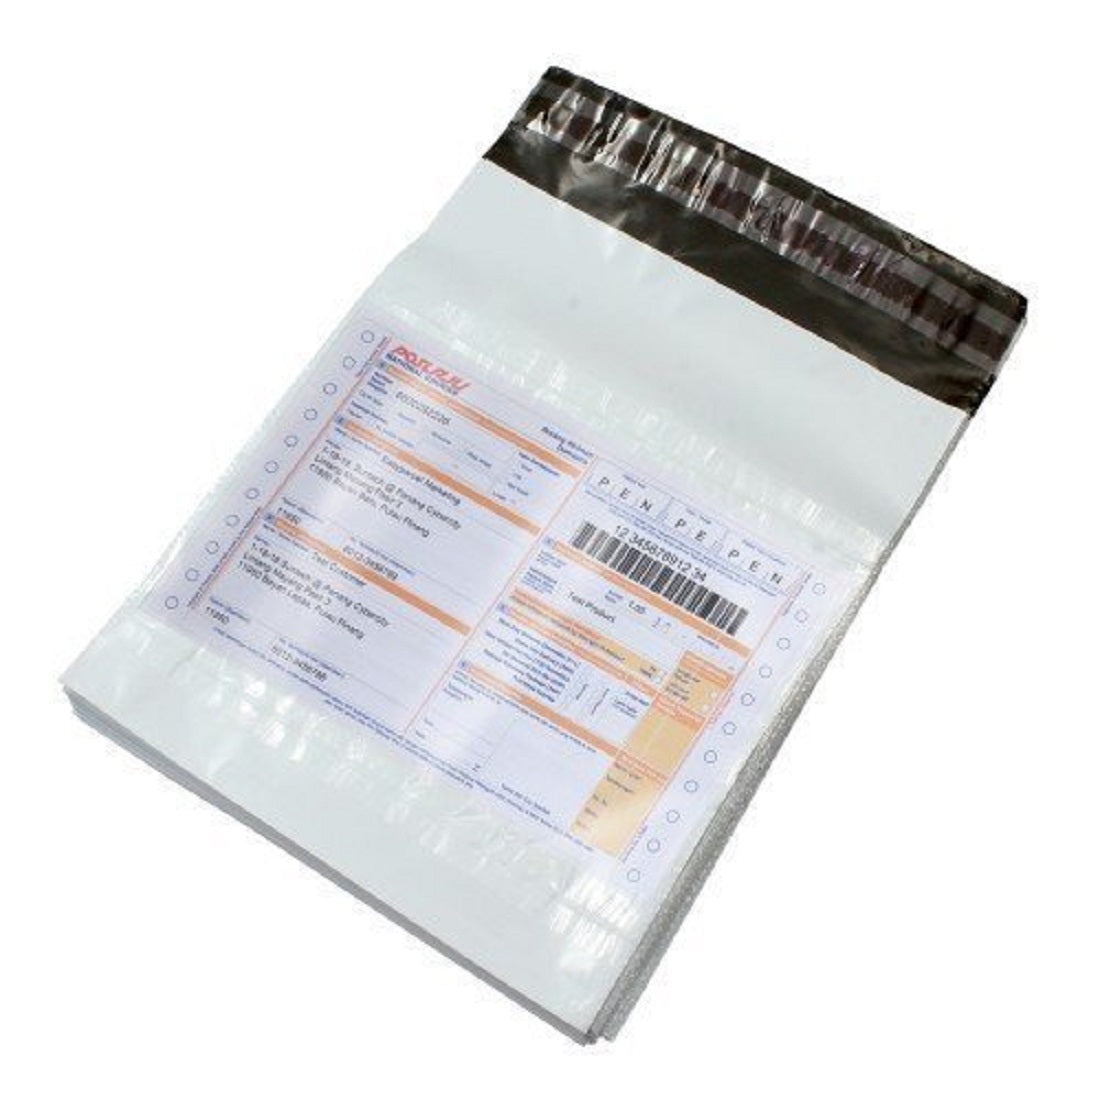 Courier Bags/Envelopes/Pouches/Cover 16X22 inches+ 2inch Flap  Pack of 100 Tamper Proof Plastic Polybags for Shipping/Packing (With POD)